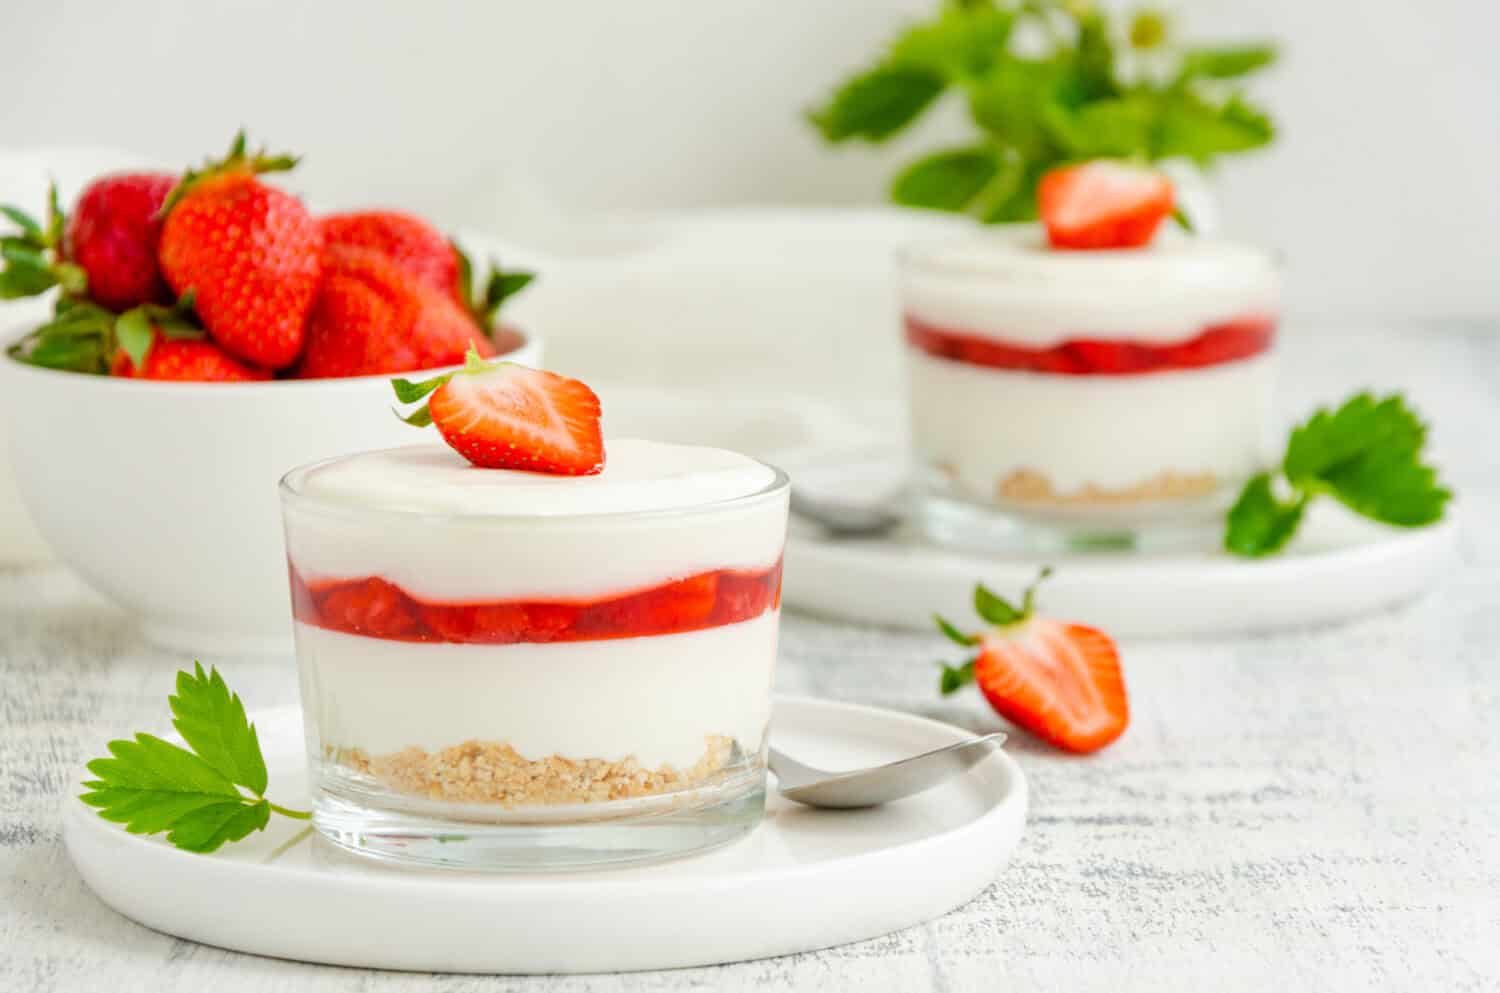 No baked strawberry cheesecake in a glass on a wooden background. Summer cold dessert. Horizontal, copy space